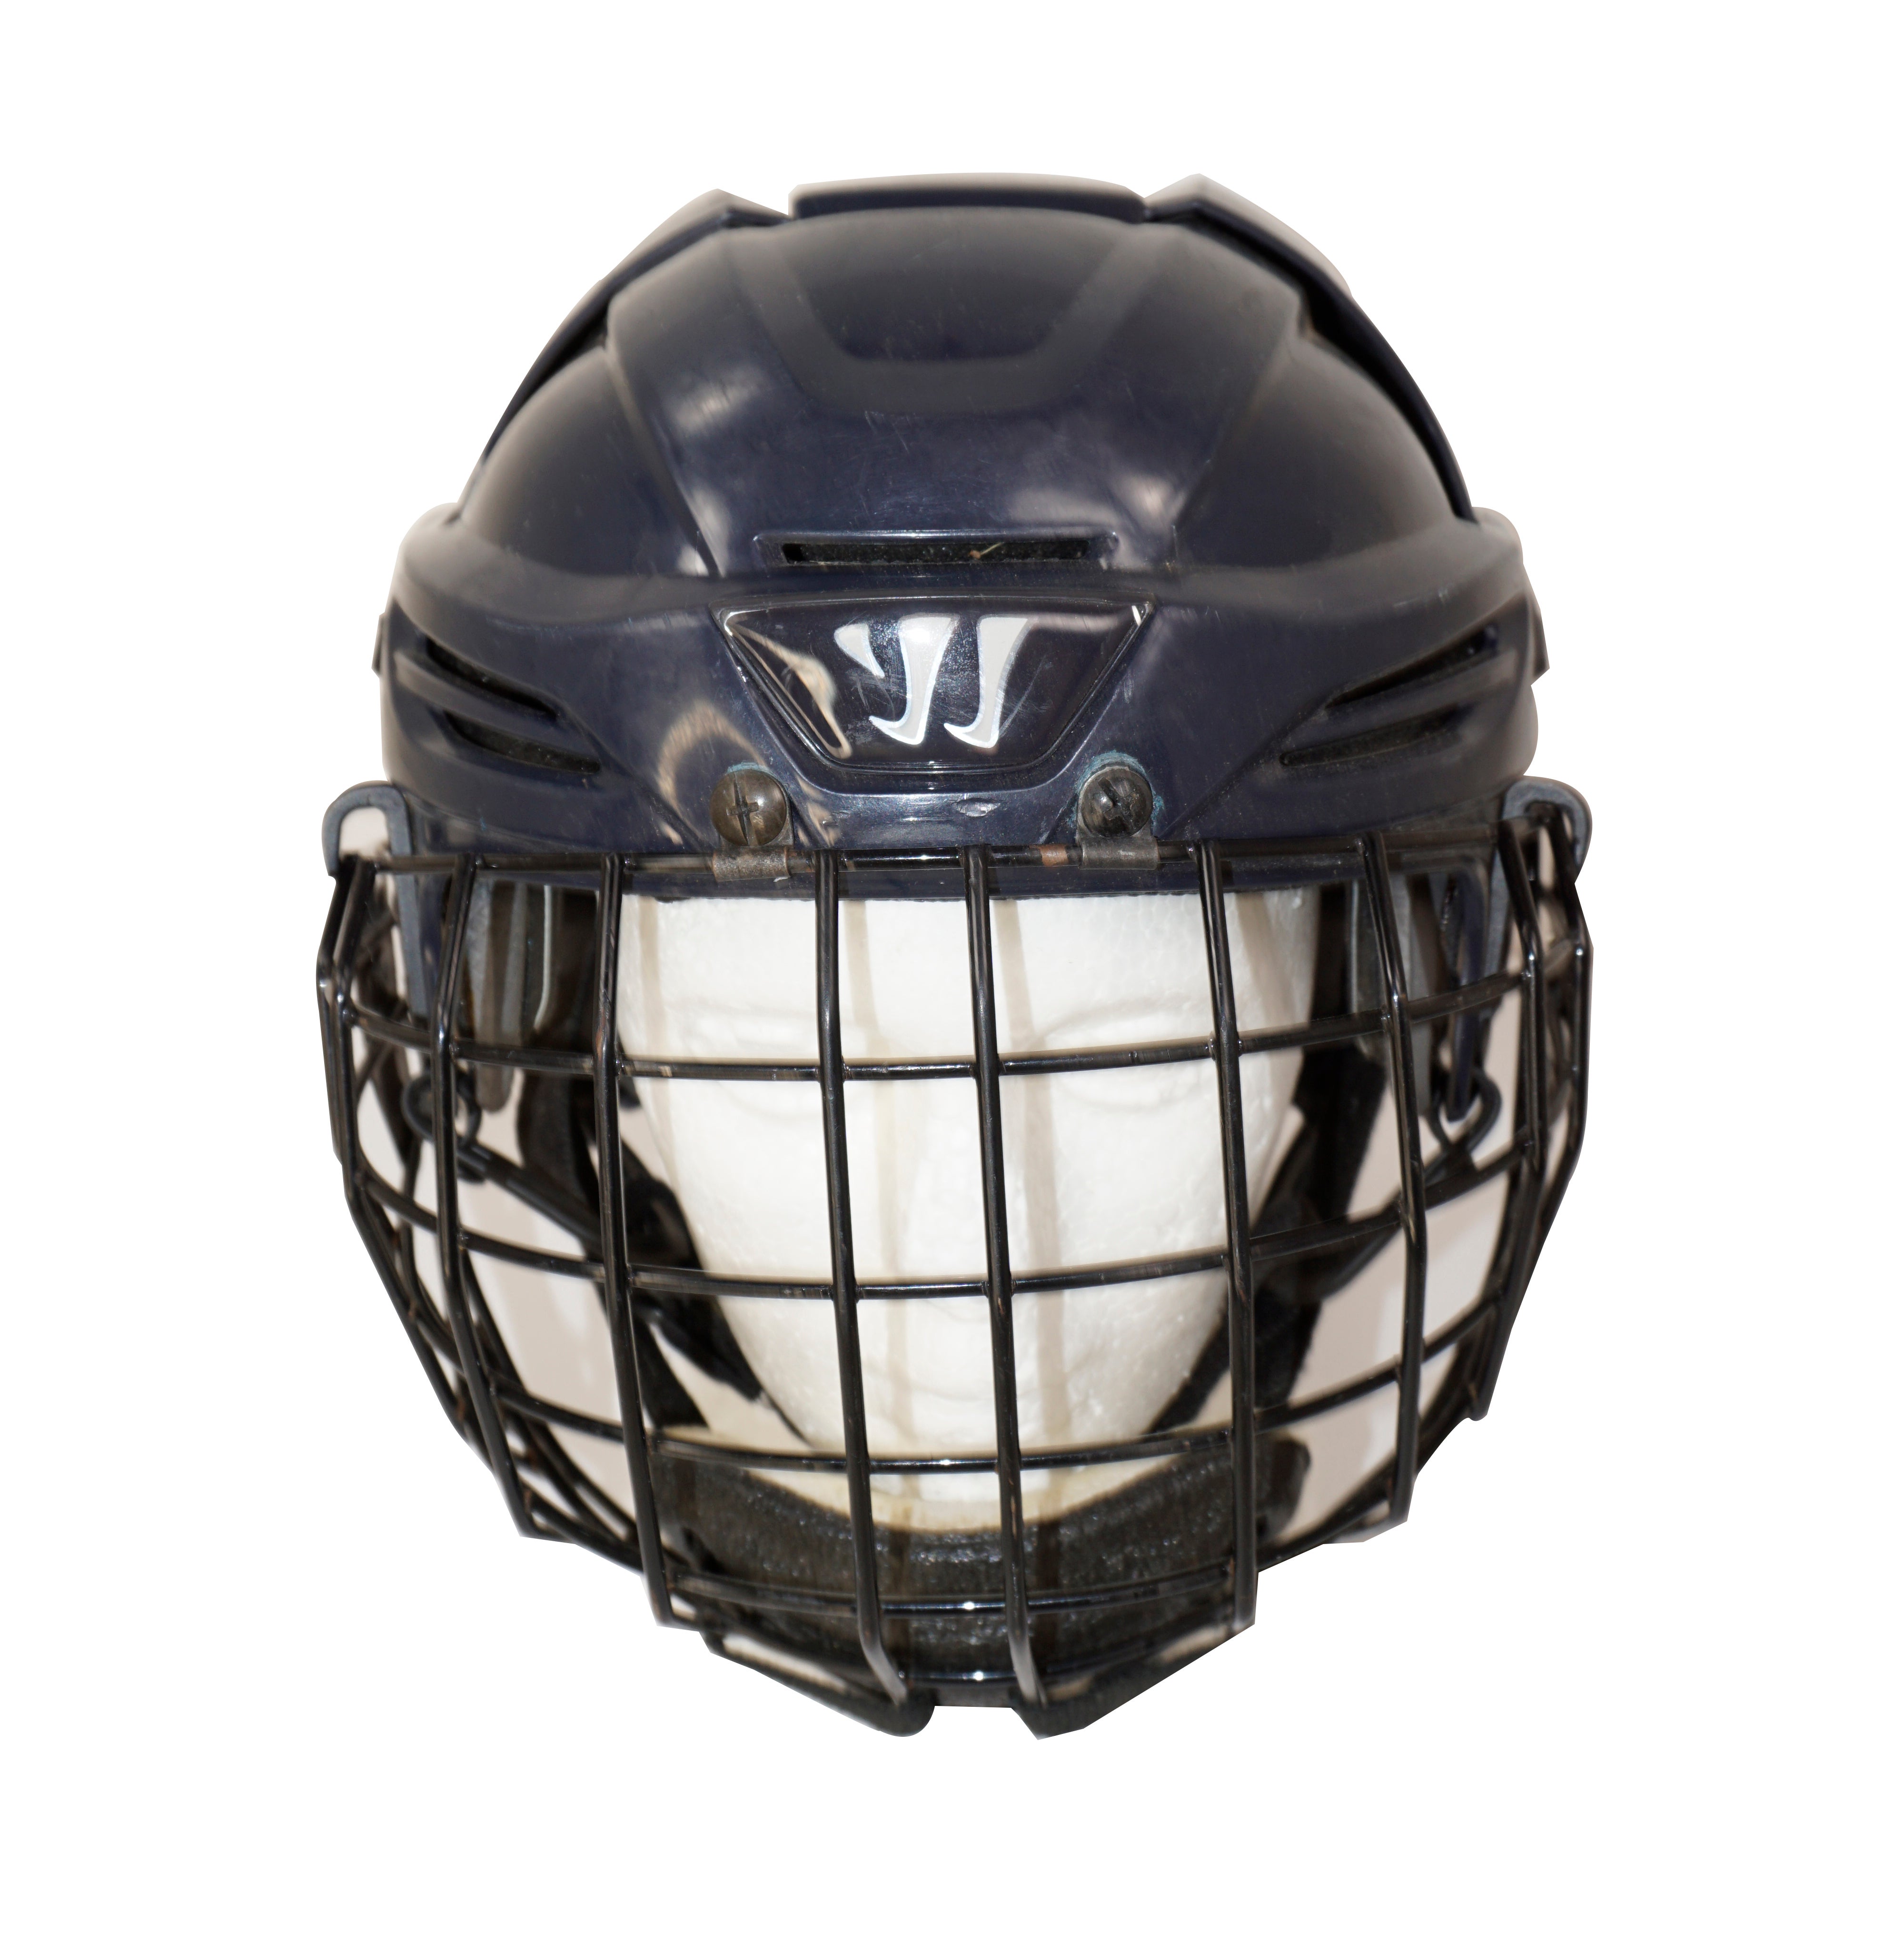 Replacement Chin Pad Cage HHCCKRO2 Warrior Krown 360 Hockey Helmet Chin Cup 